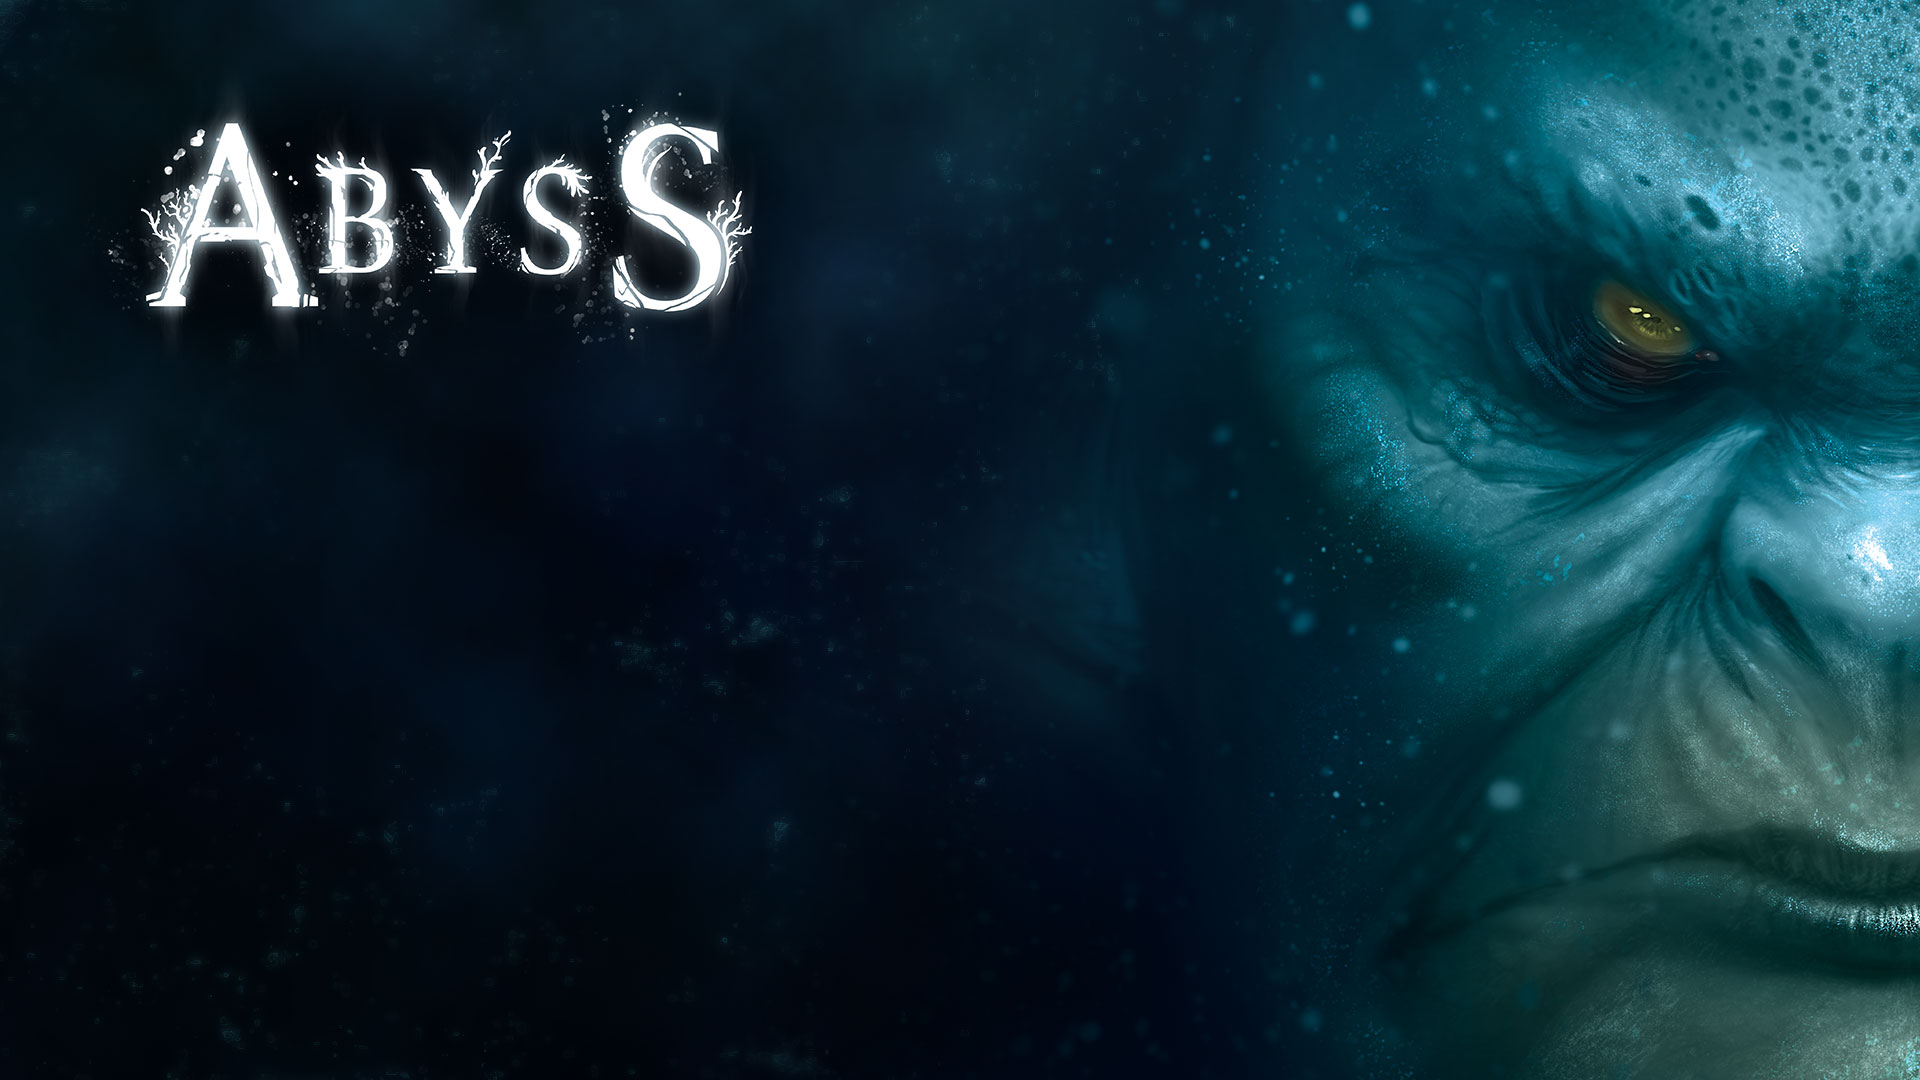 Screen Abyss Backgrounds Images. 